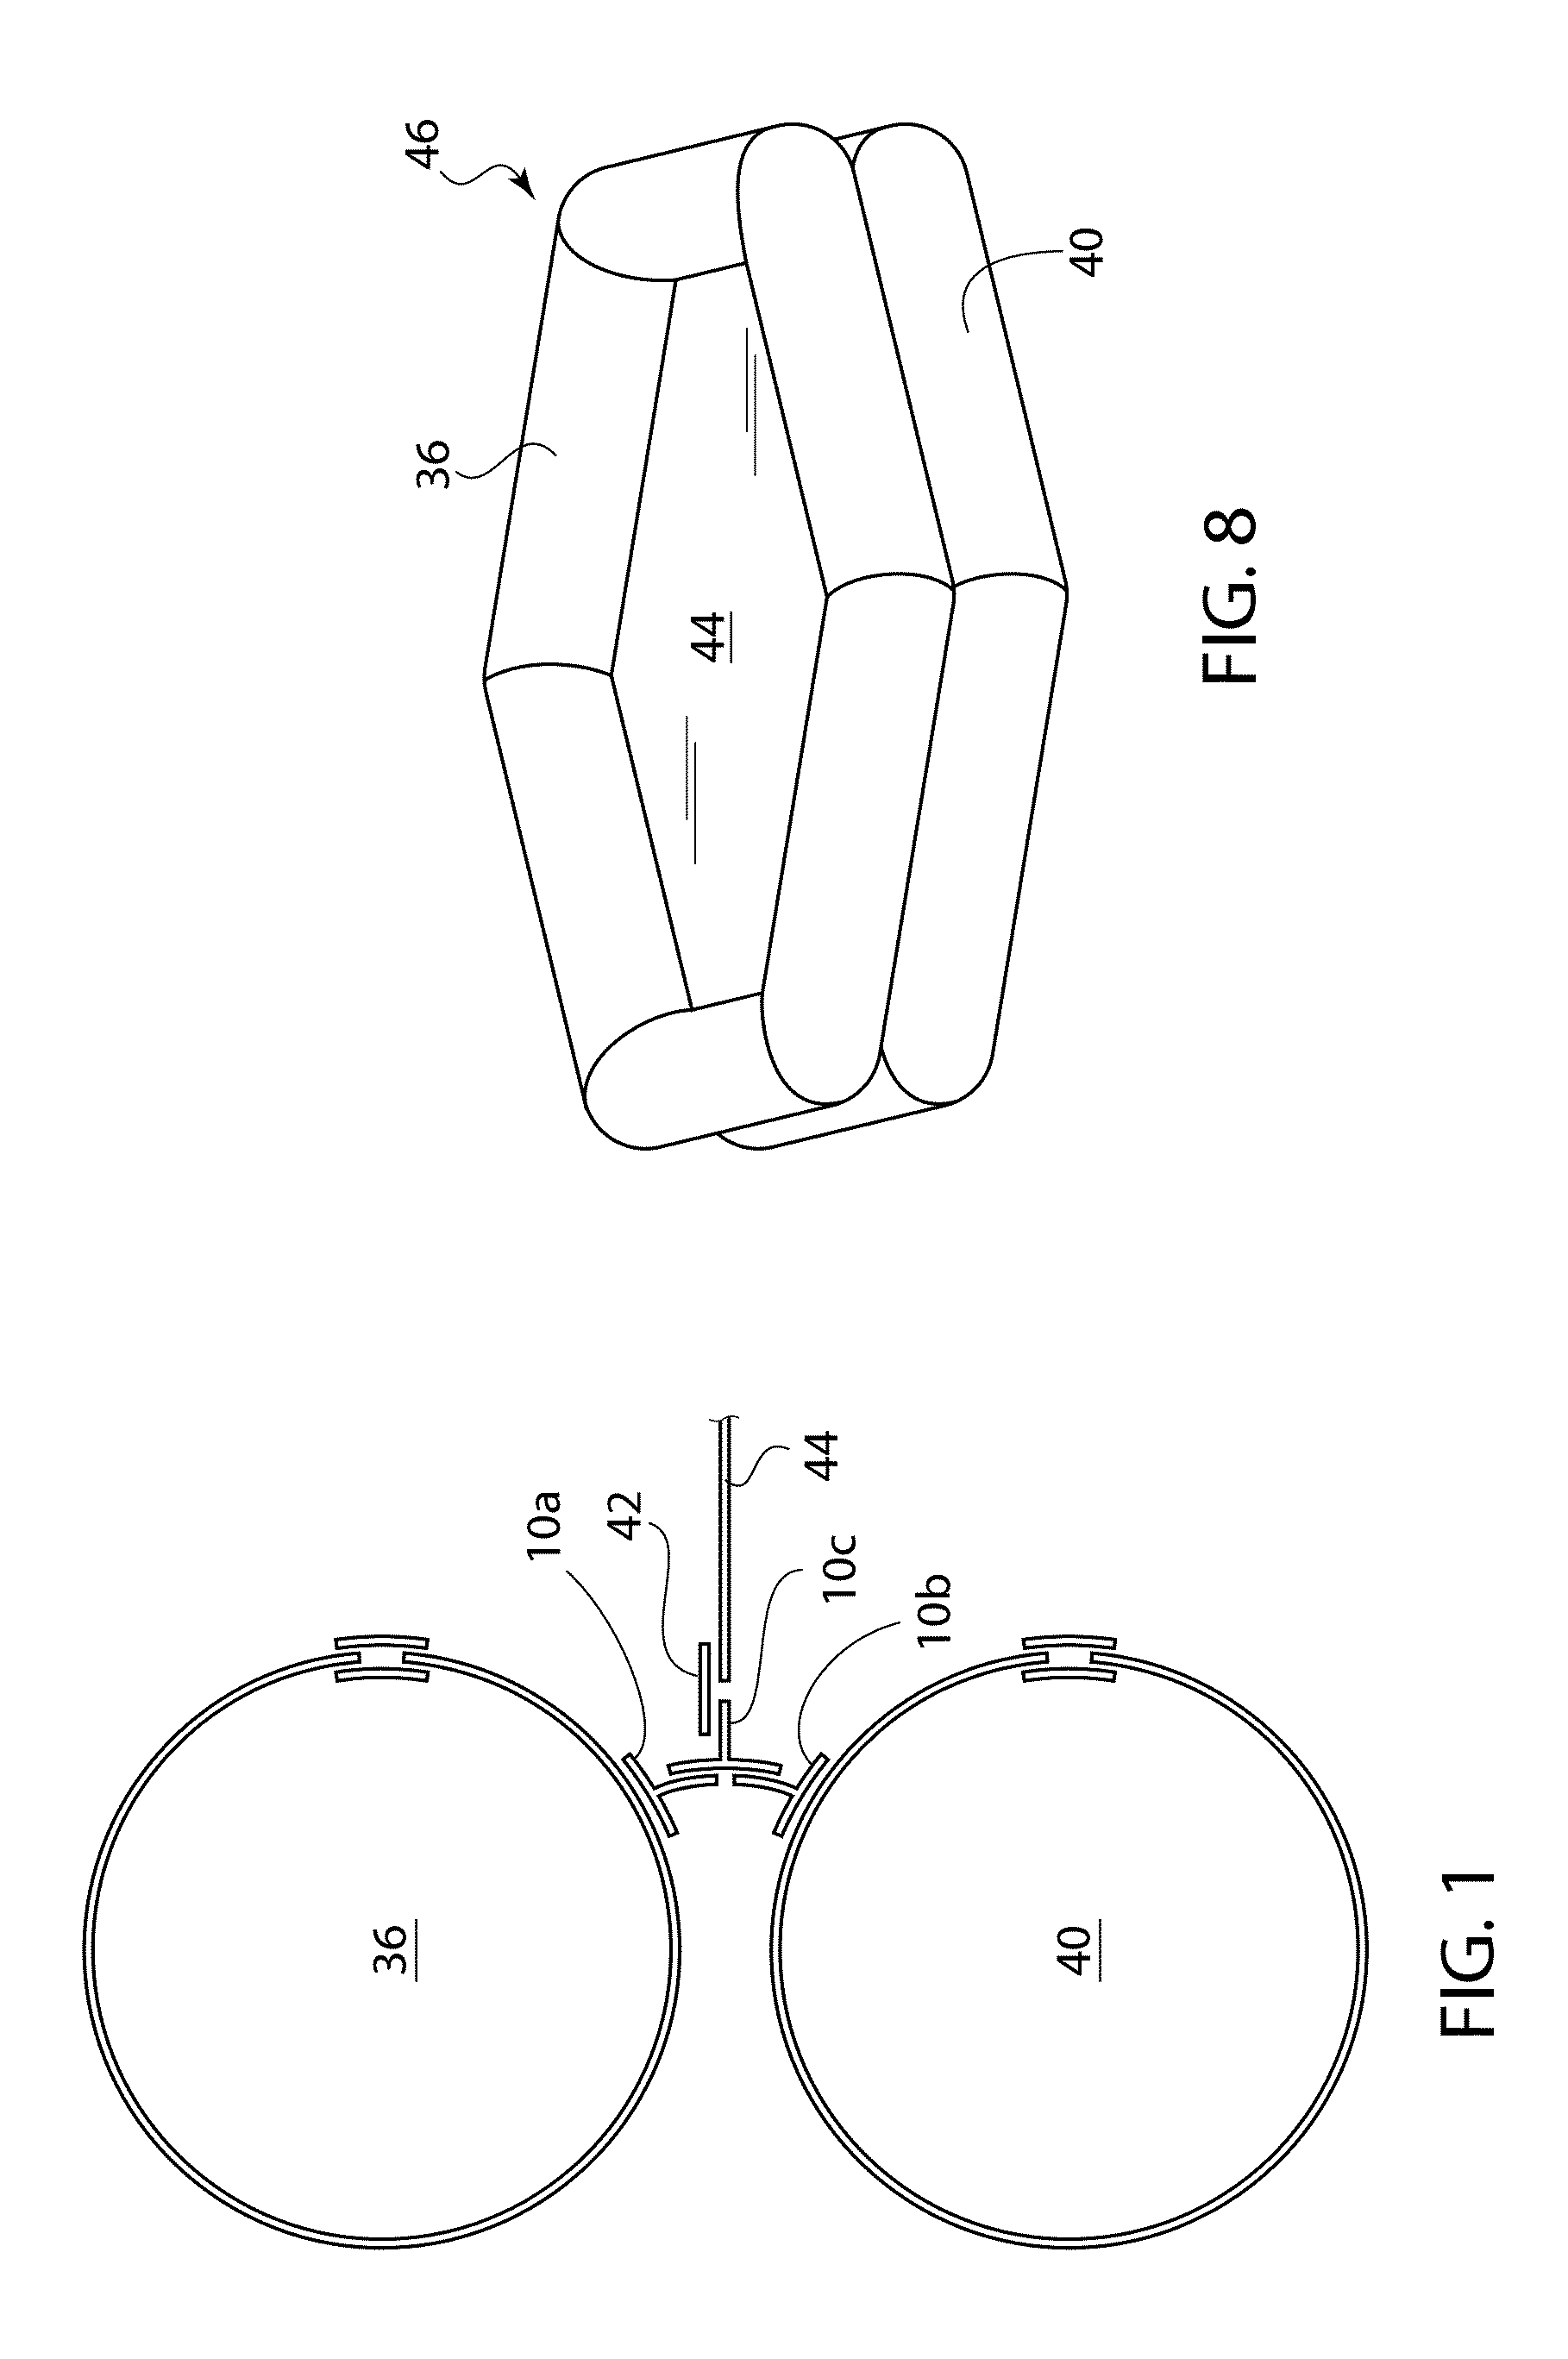 Raft assembly components and methods